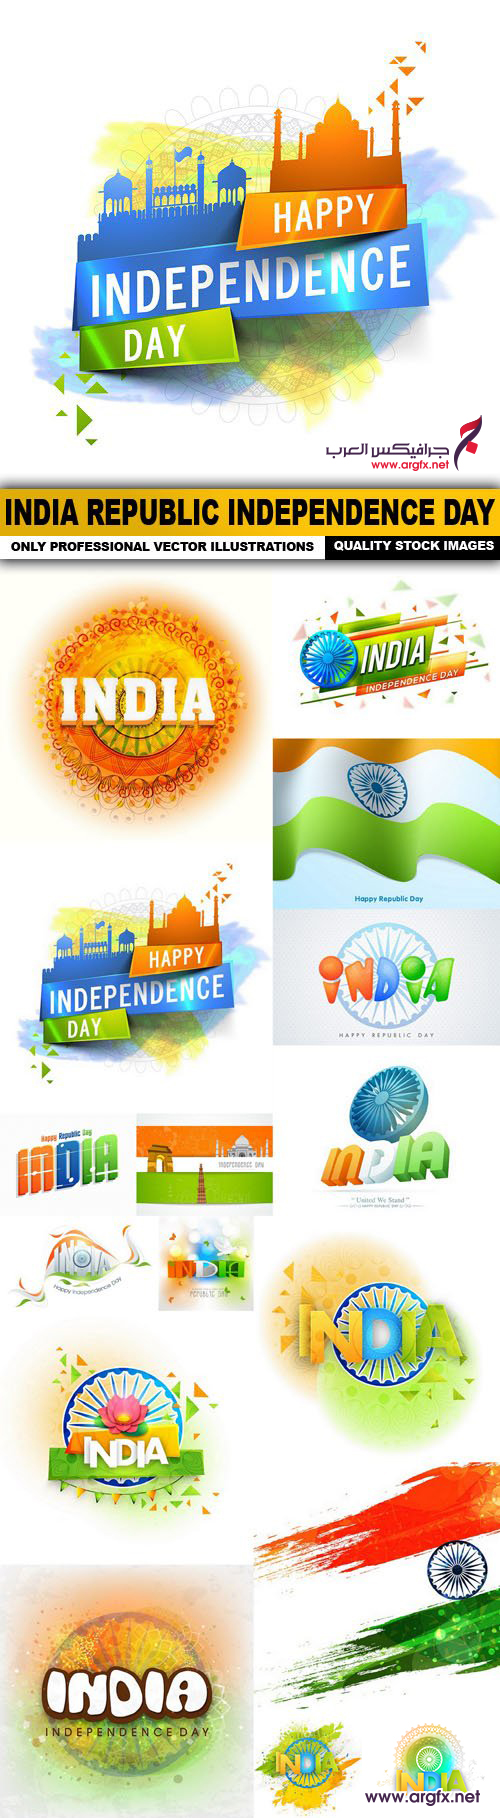  India Republic Independence Day - 16 Vector